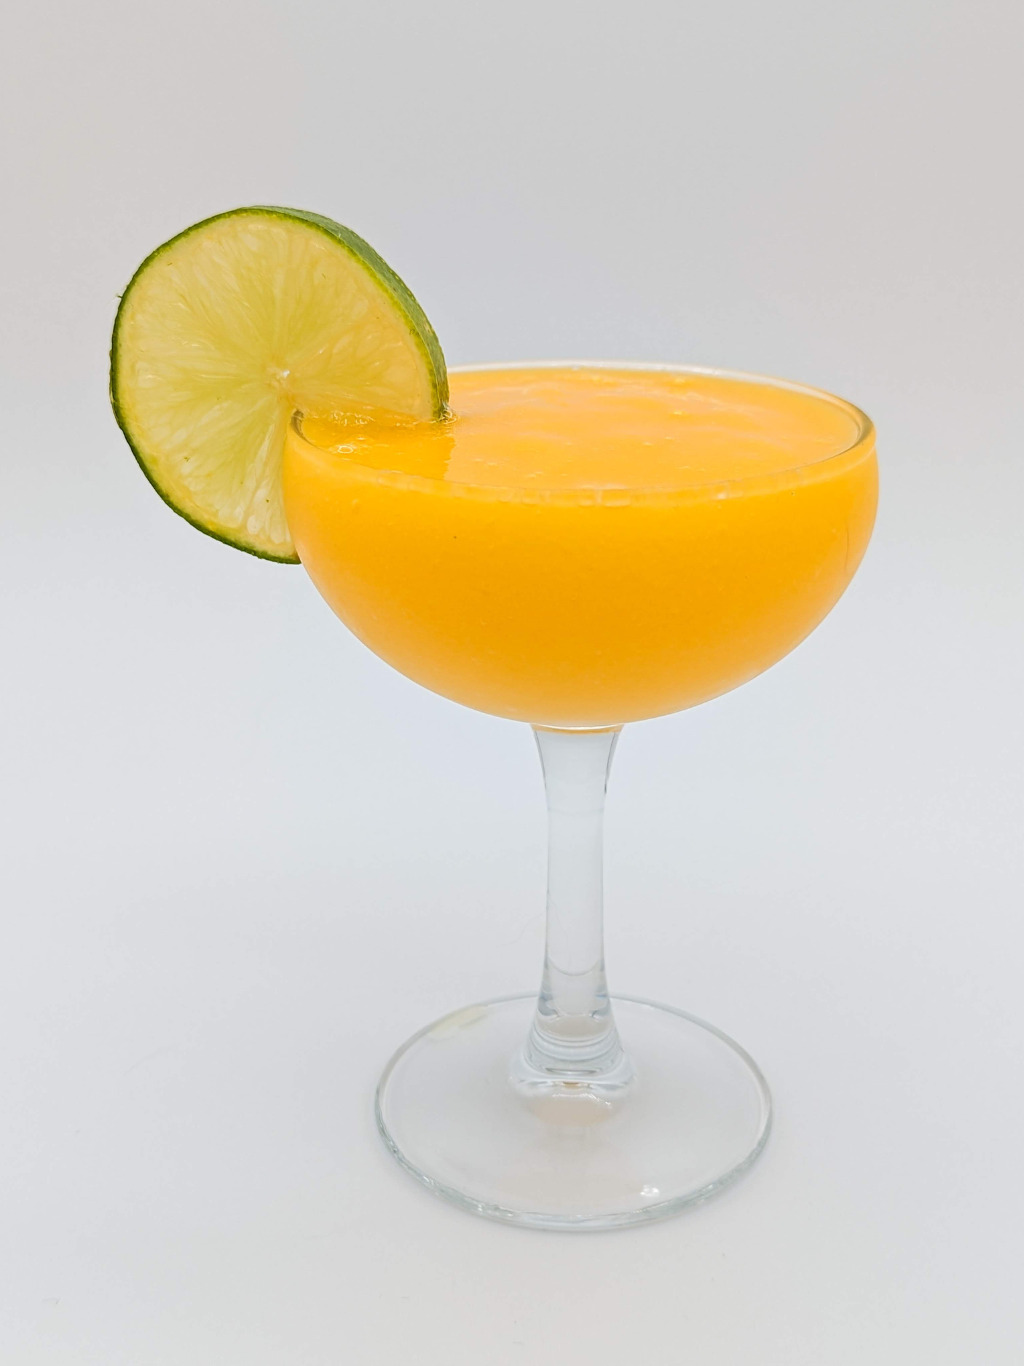 Bright orange liquid in a coupe glass with a lime wheel garnish